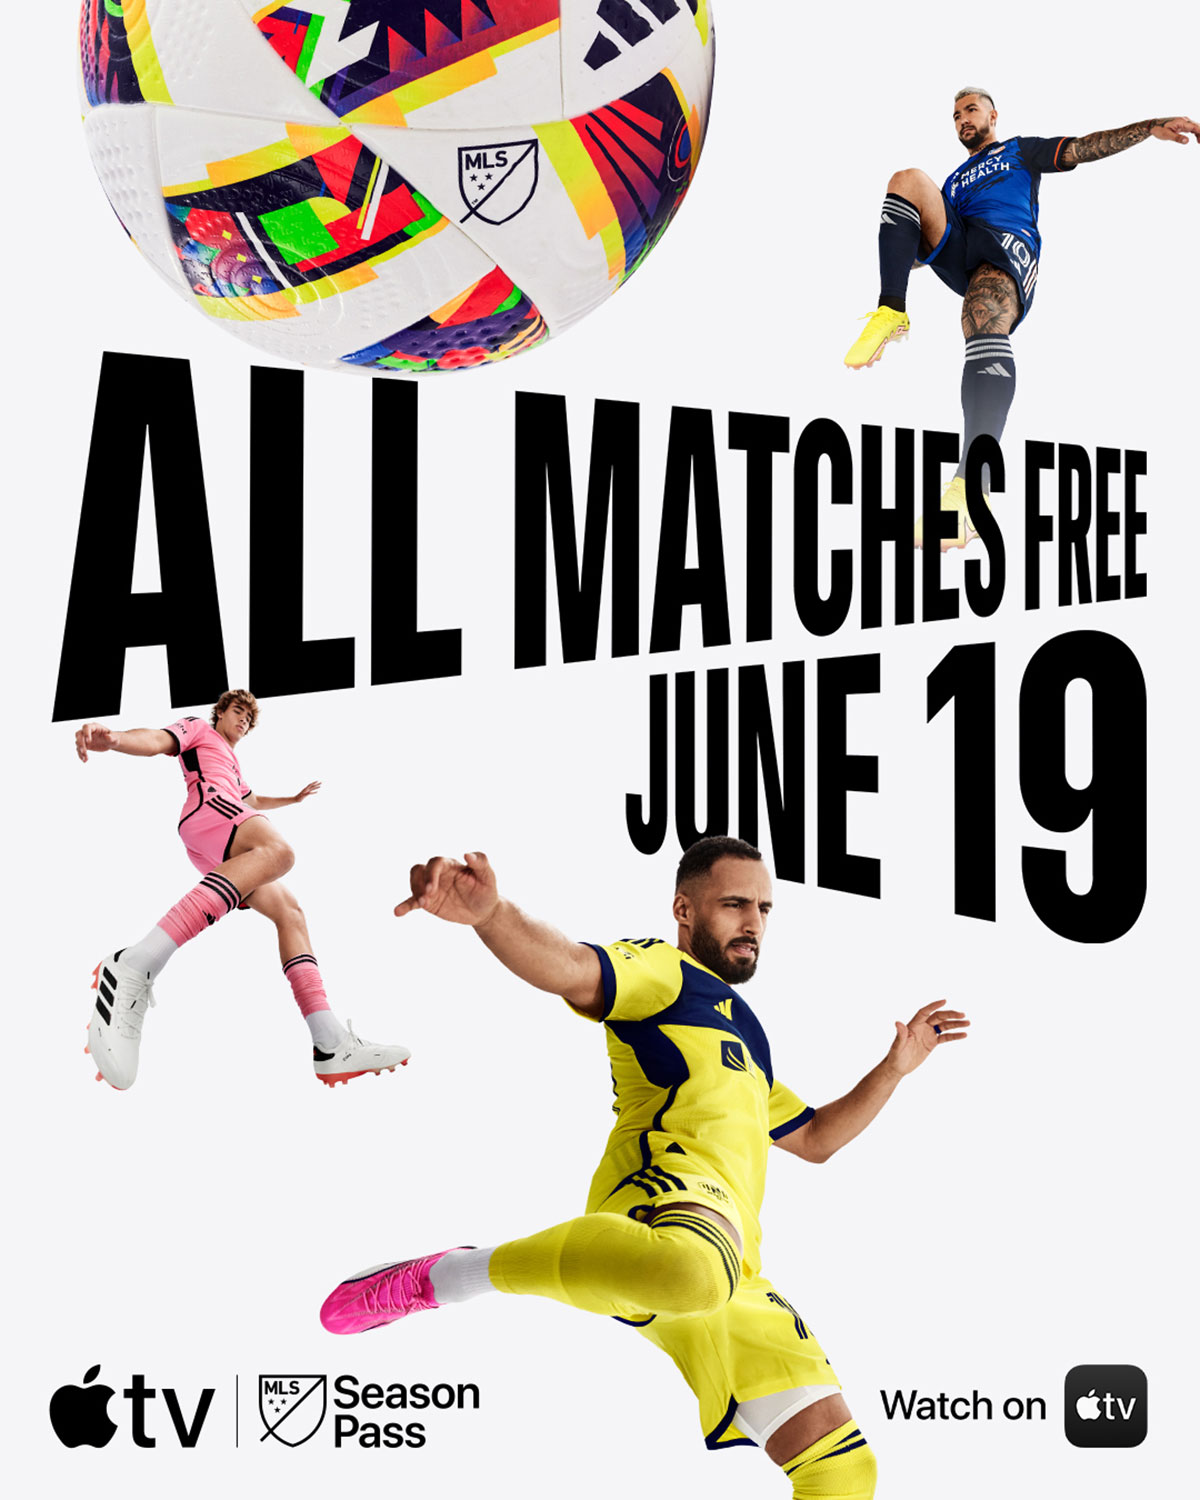 All Matches Free June 19